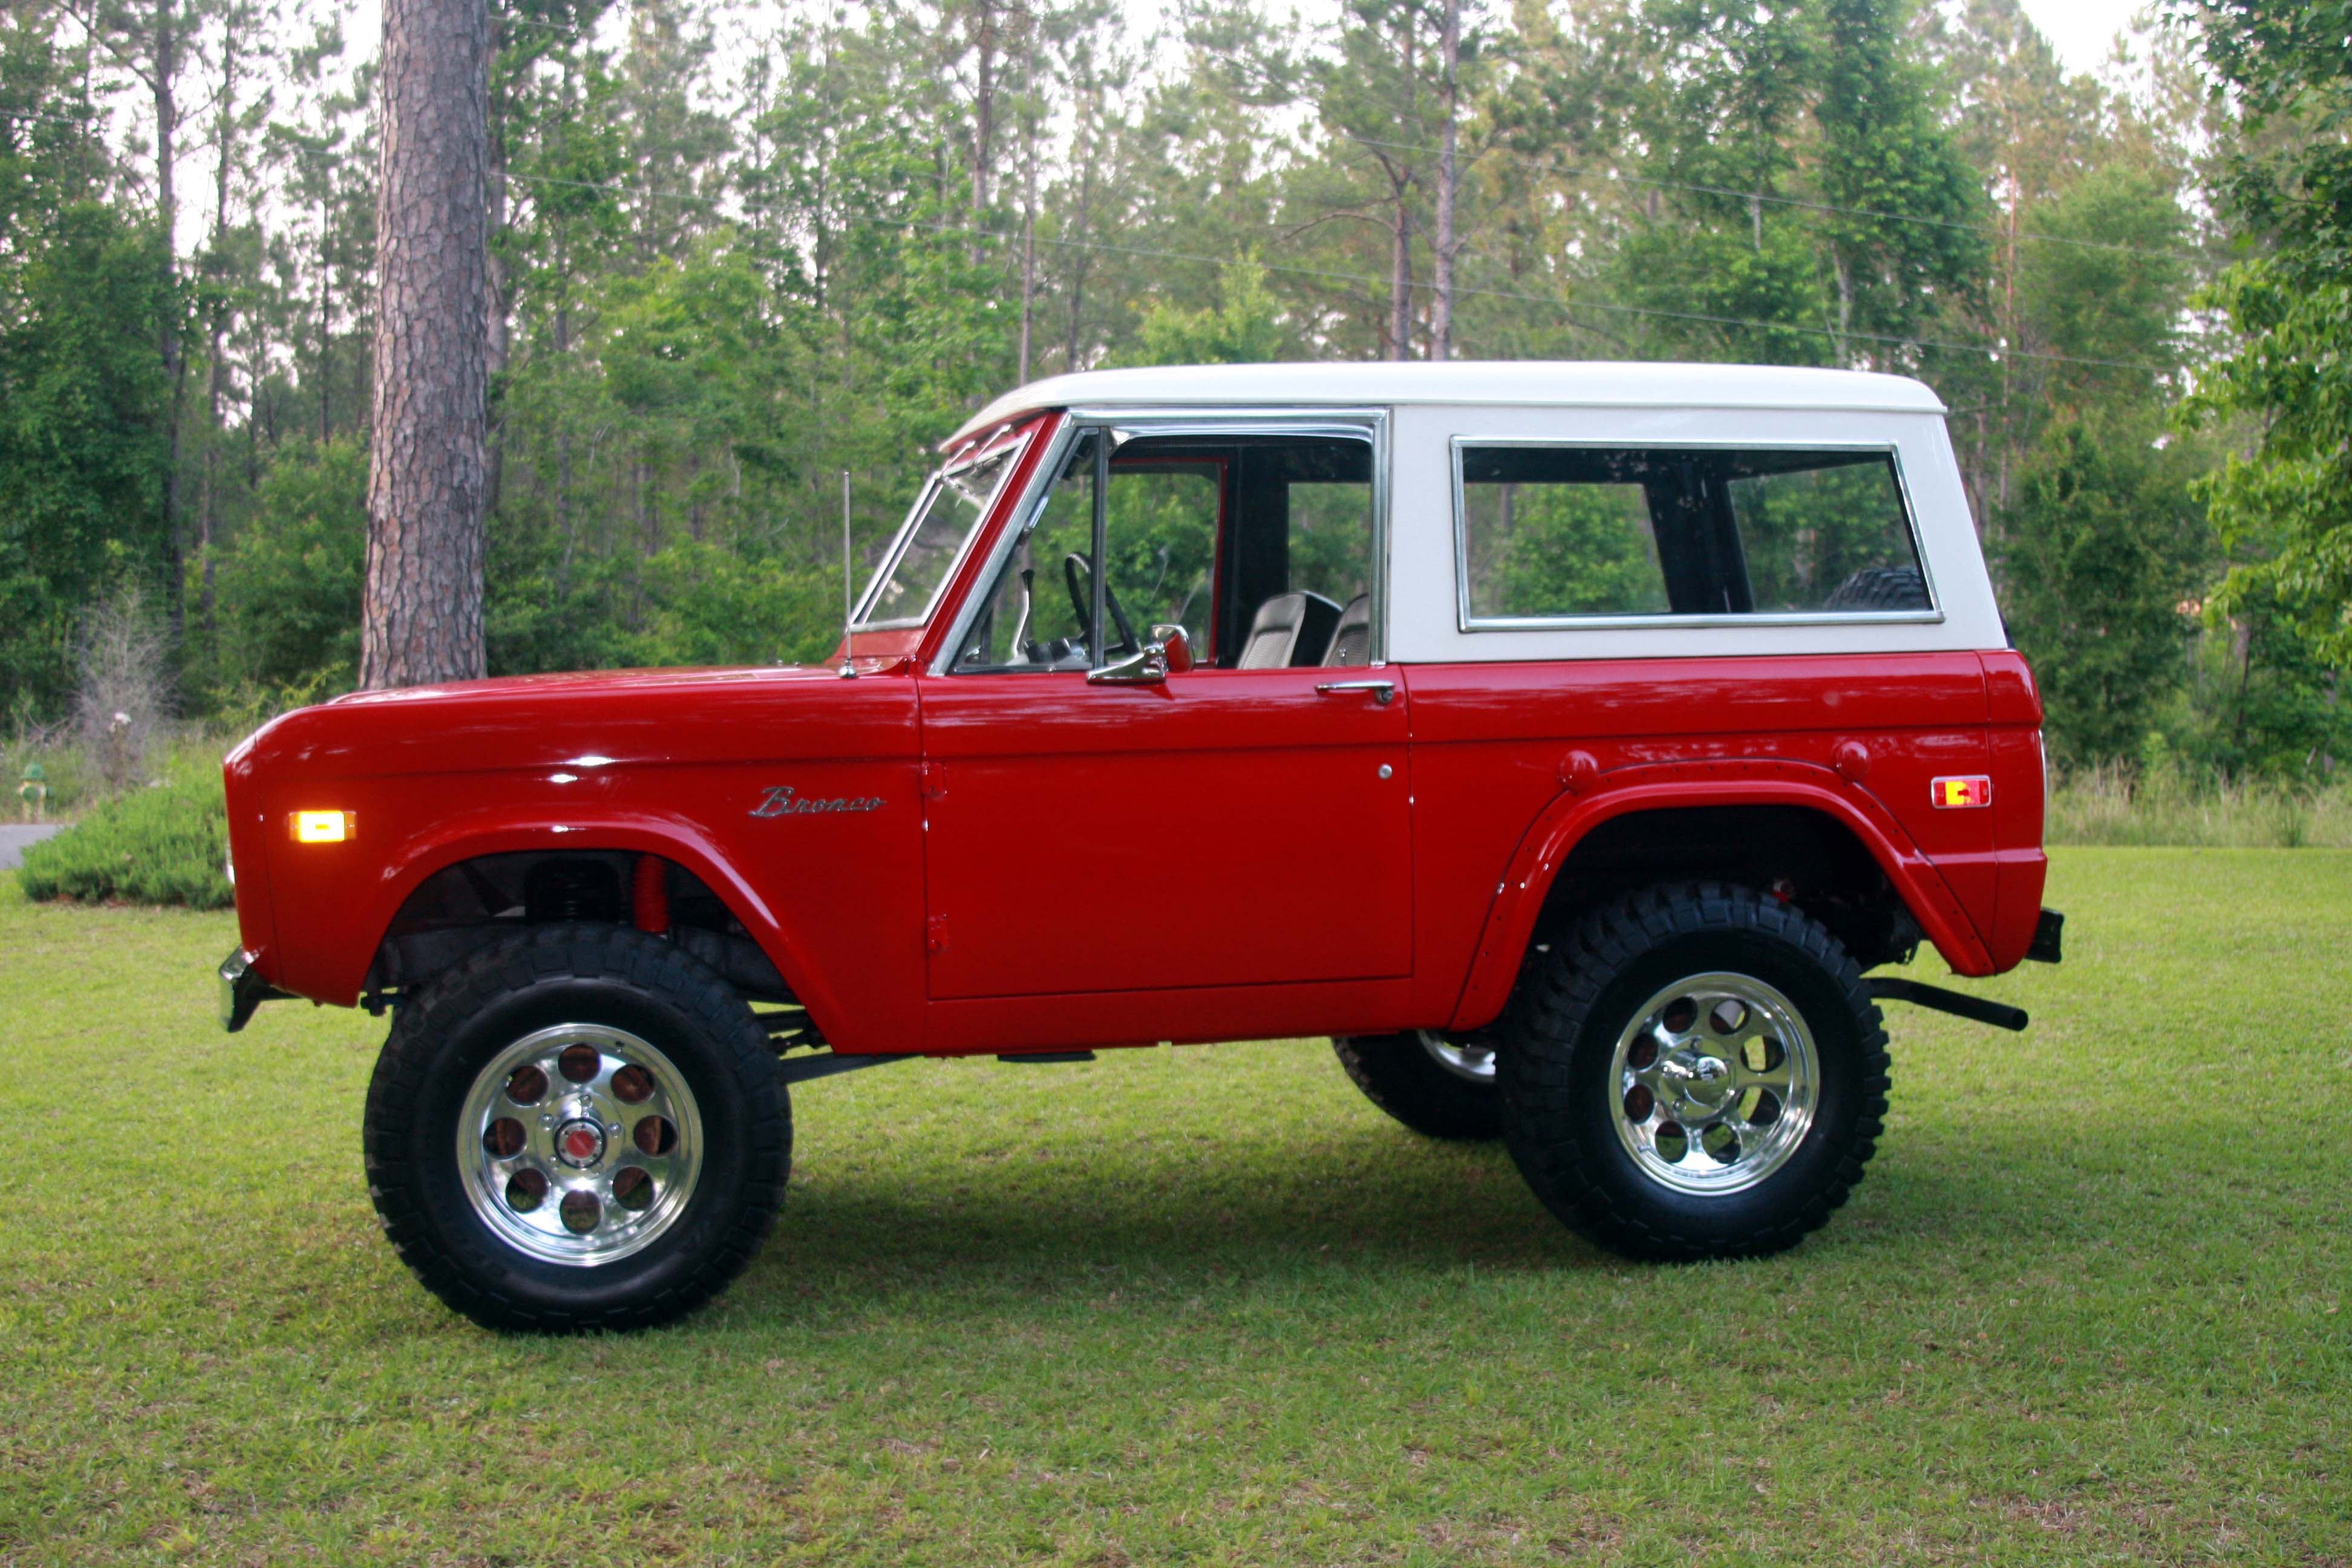 2F%2Fwww.lcarsmotorcycles.com%2Fwp-content%2Fuploads%2F2014%2F11%2Fclassic-ford-bronco-early-suv.jpg